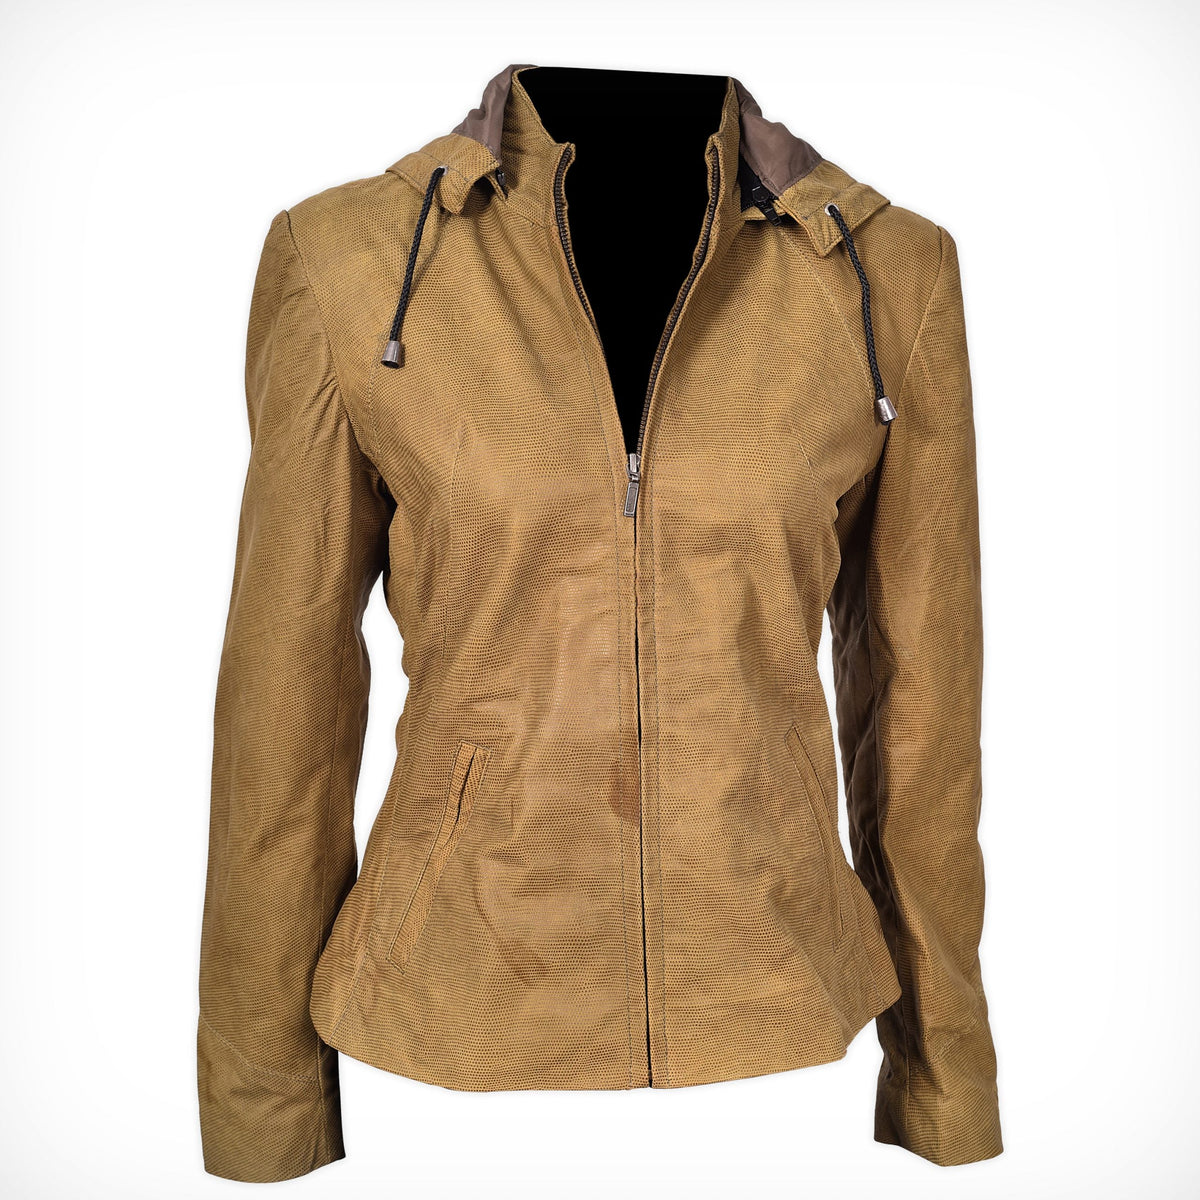 Womens Classy Fit Yellow Hooded Leather Jacket